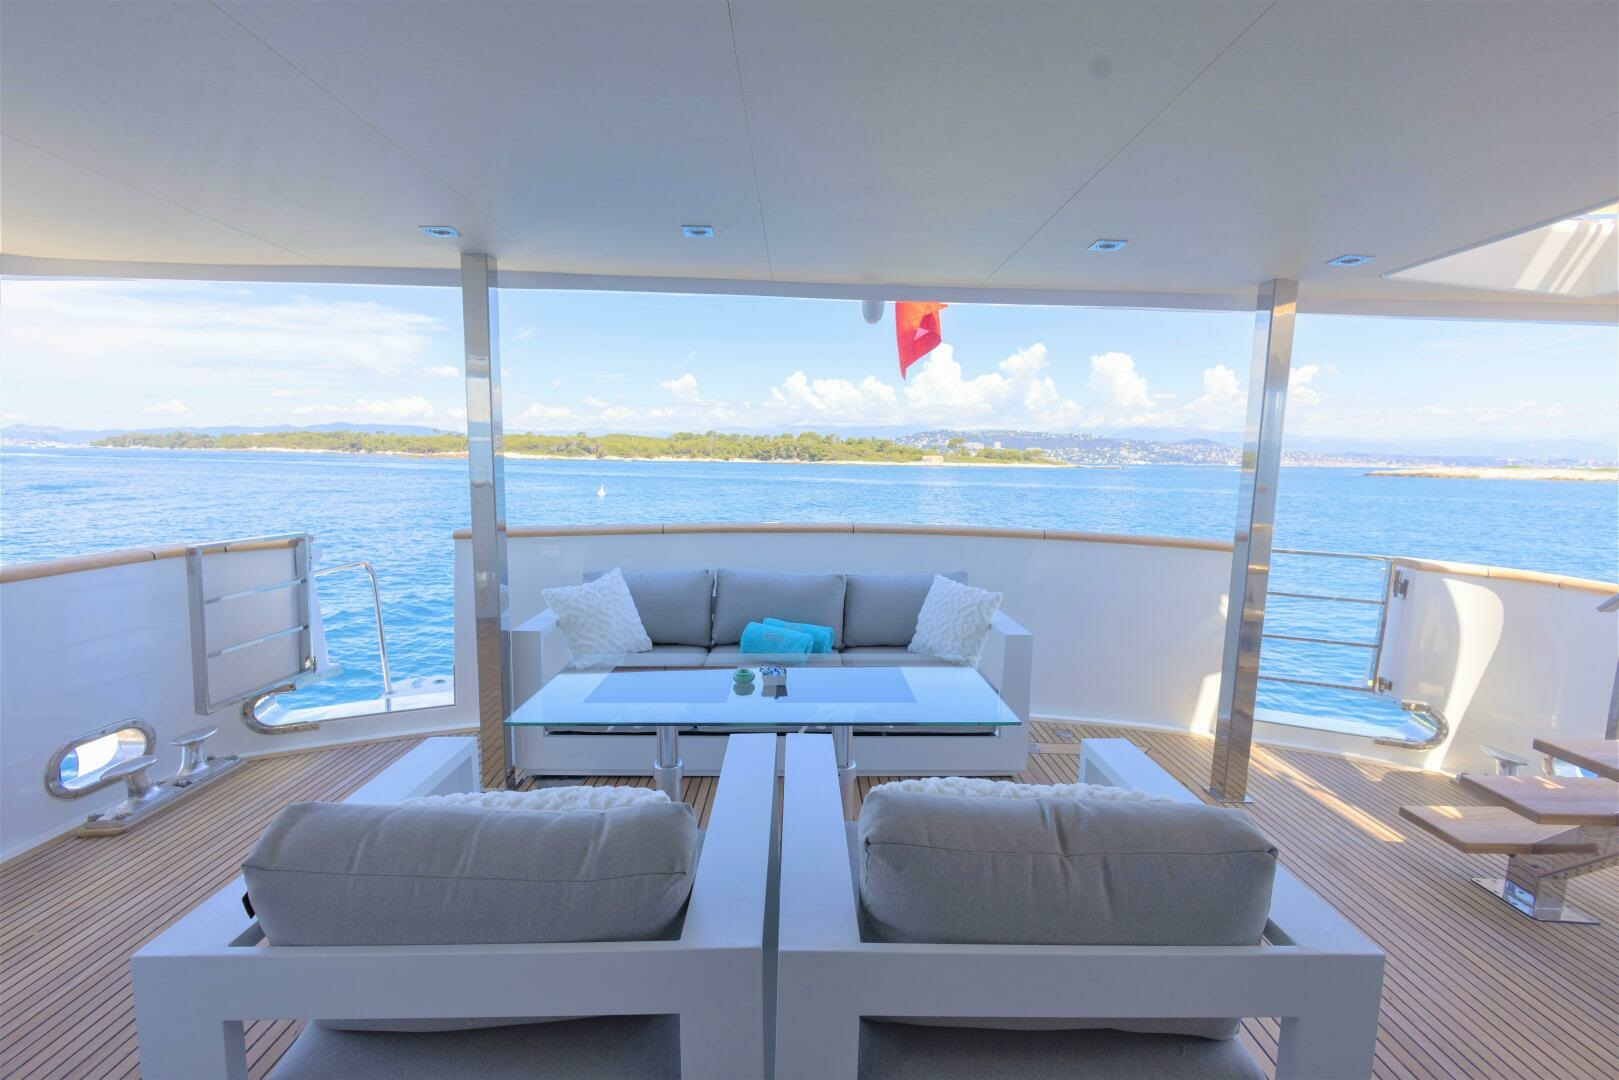 Main Deck Aft Lounge View To Stern